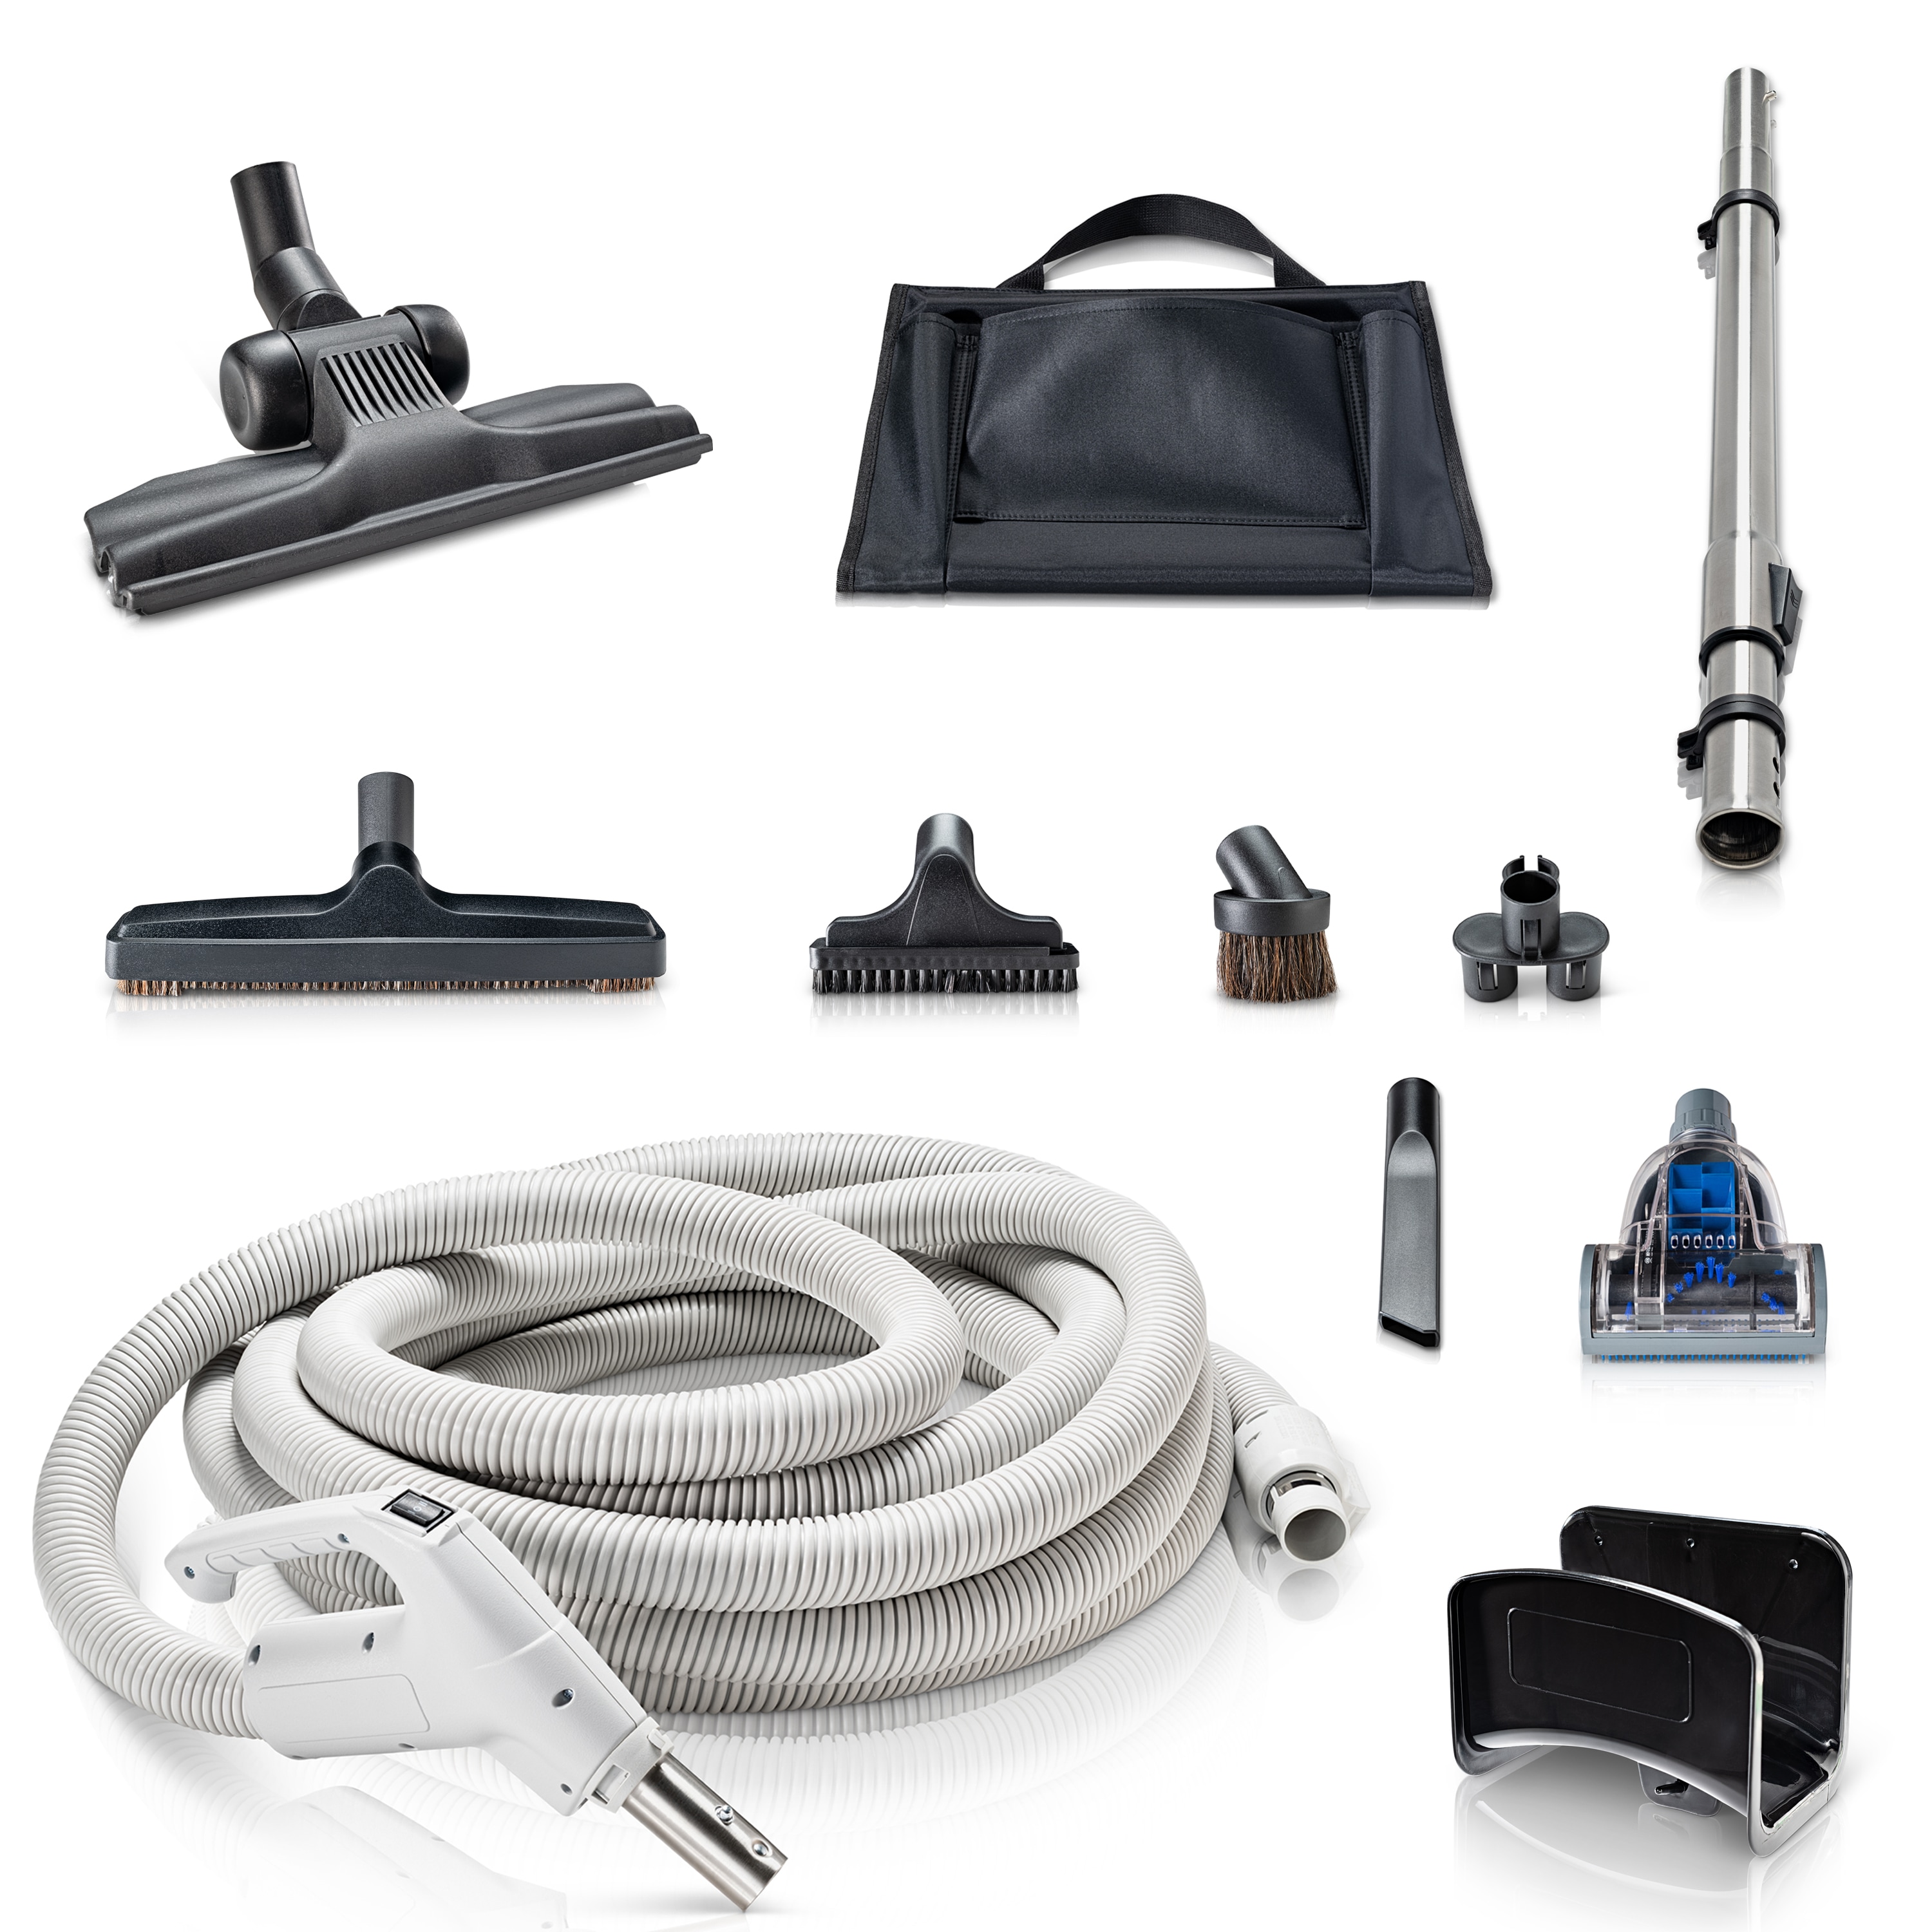 Prolux 30 Ft. Central Vacuum Kit with Turbo Nozzles and 1 Yr Warranty - Prolux, Electrolux, Honeywell, Vacumaid, Beam, Hoover, Aggressor, NuTone -  PLTN30